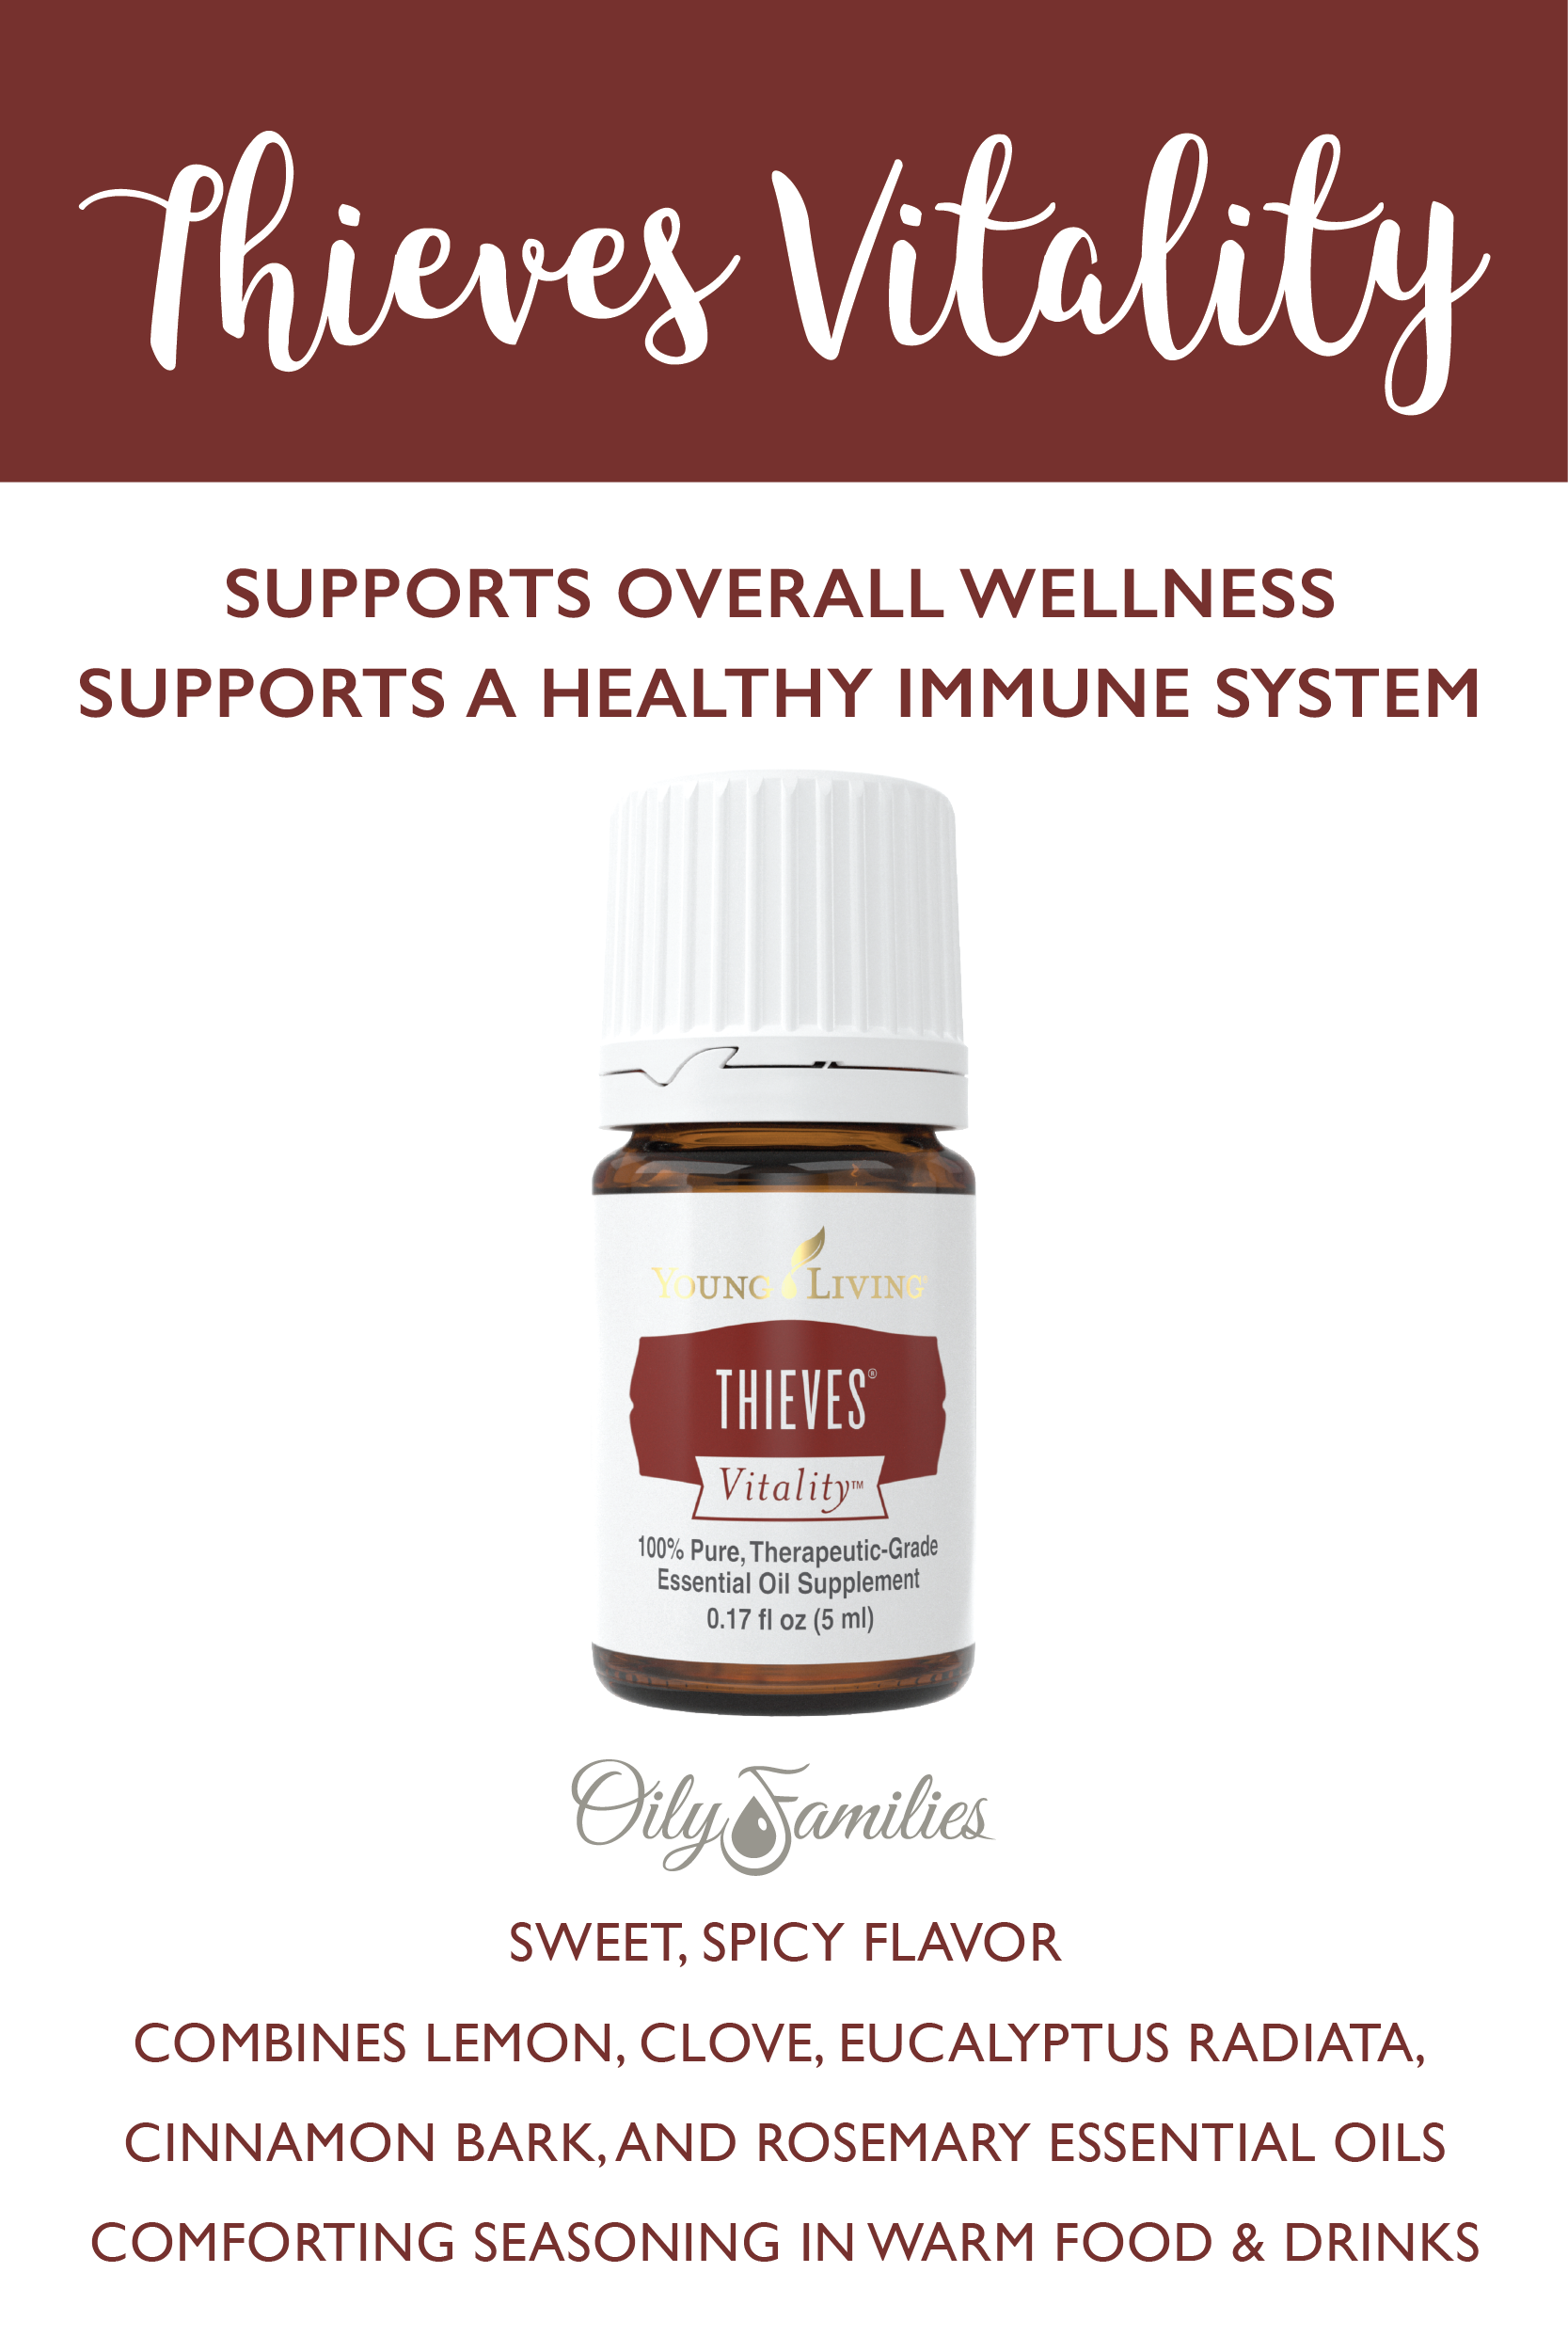 Thieves essential oil benefits